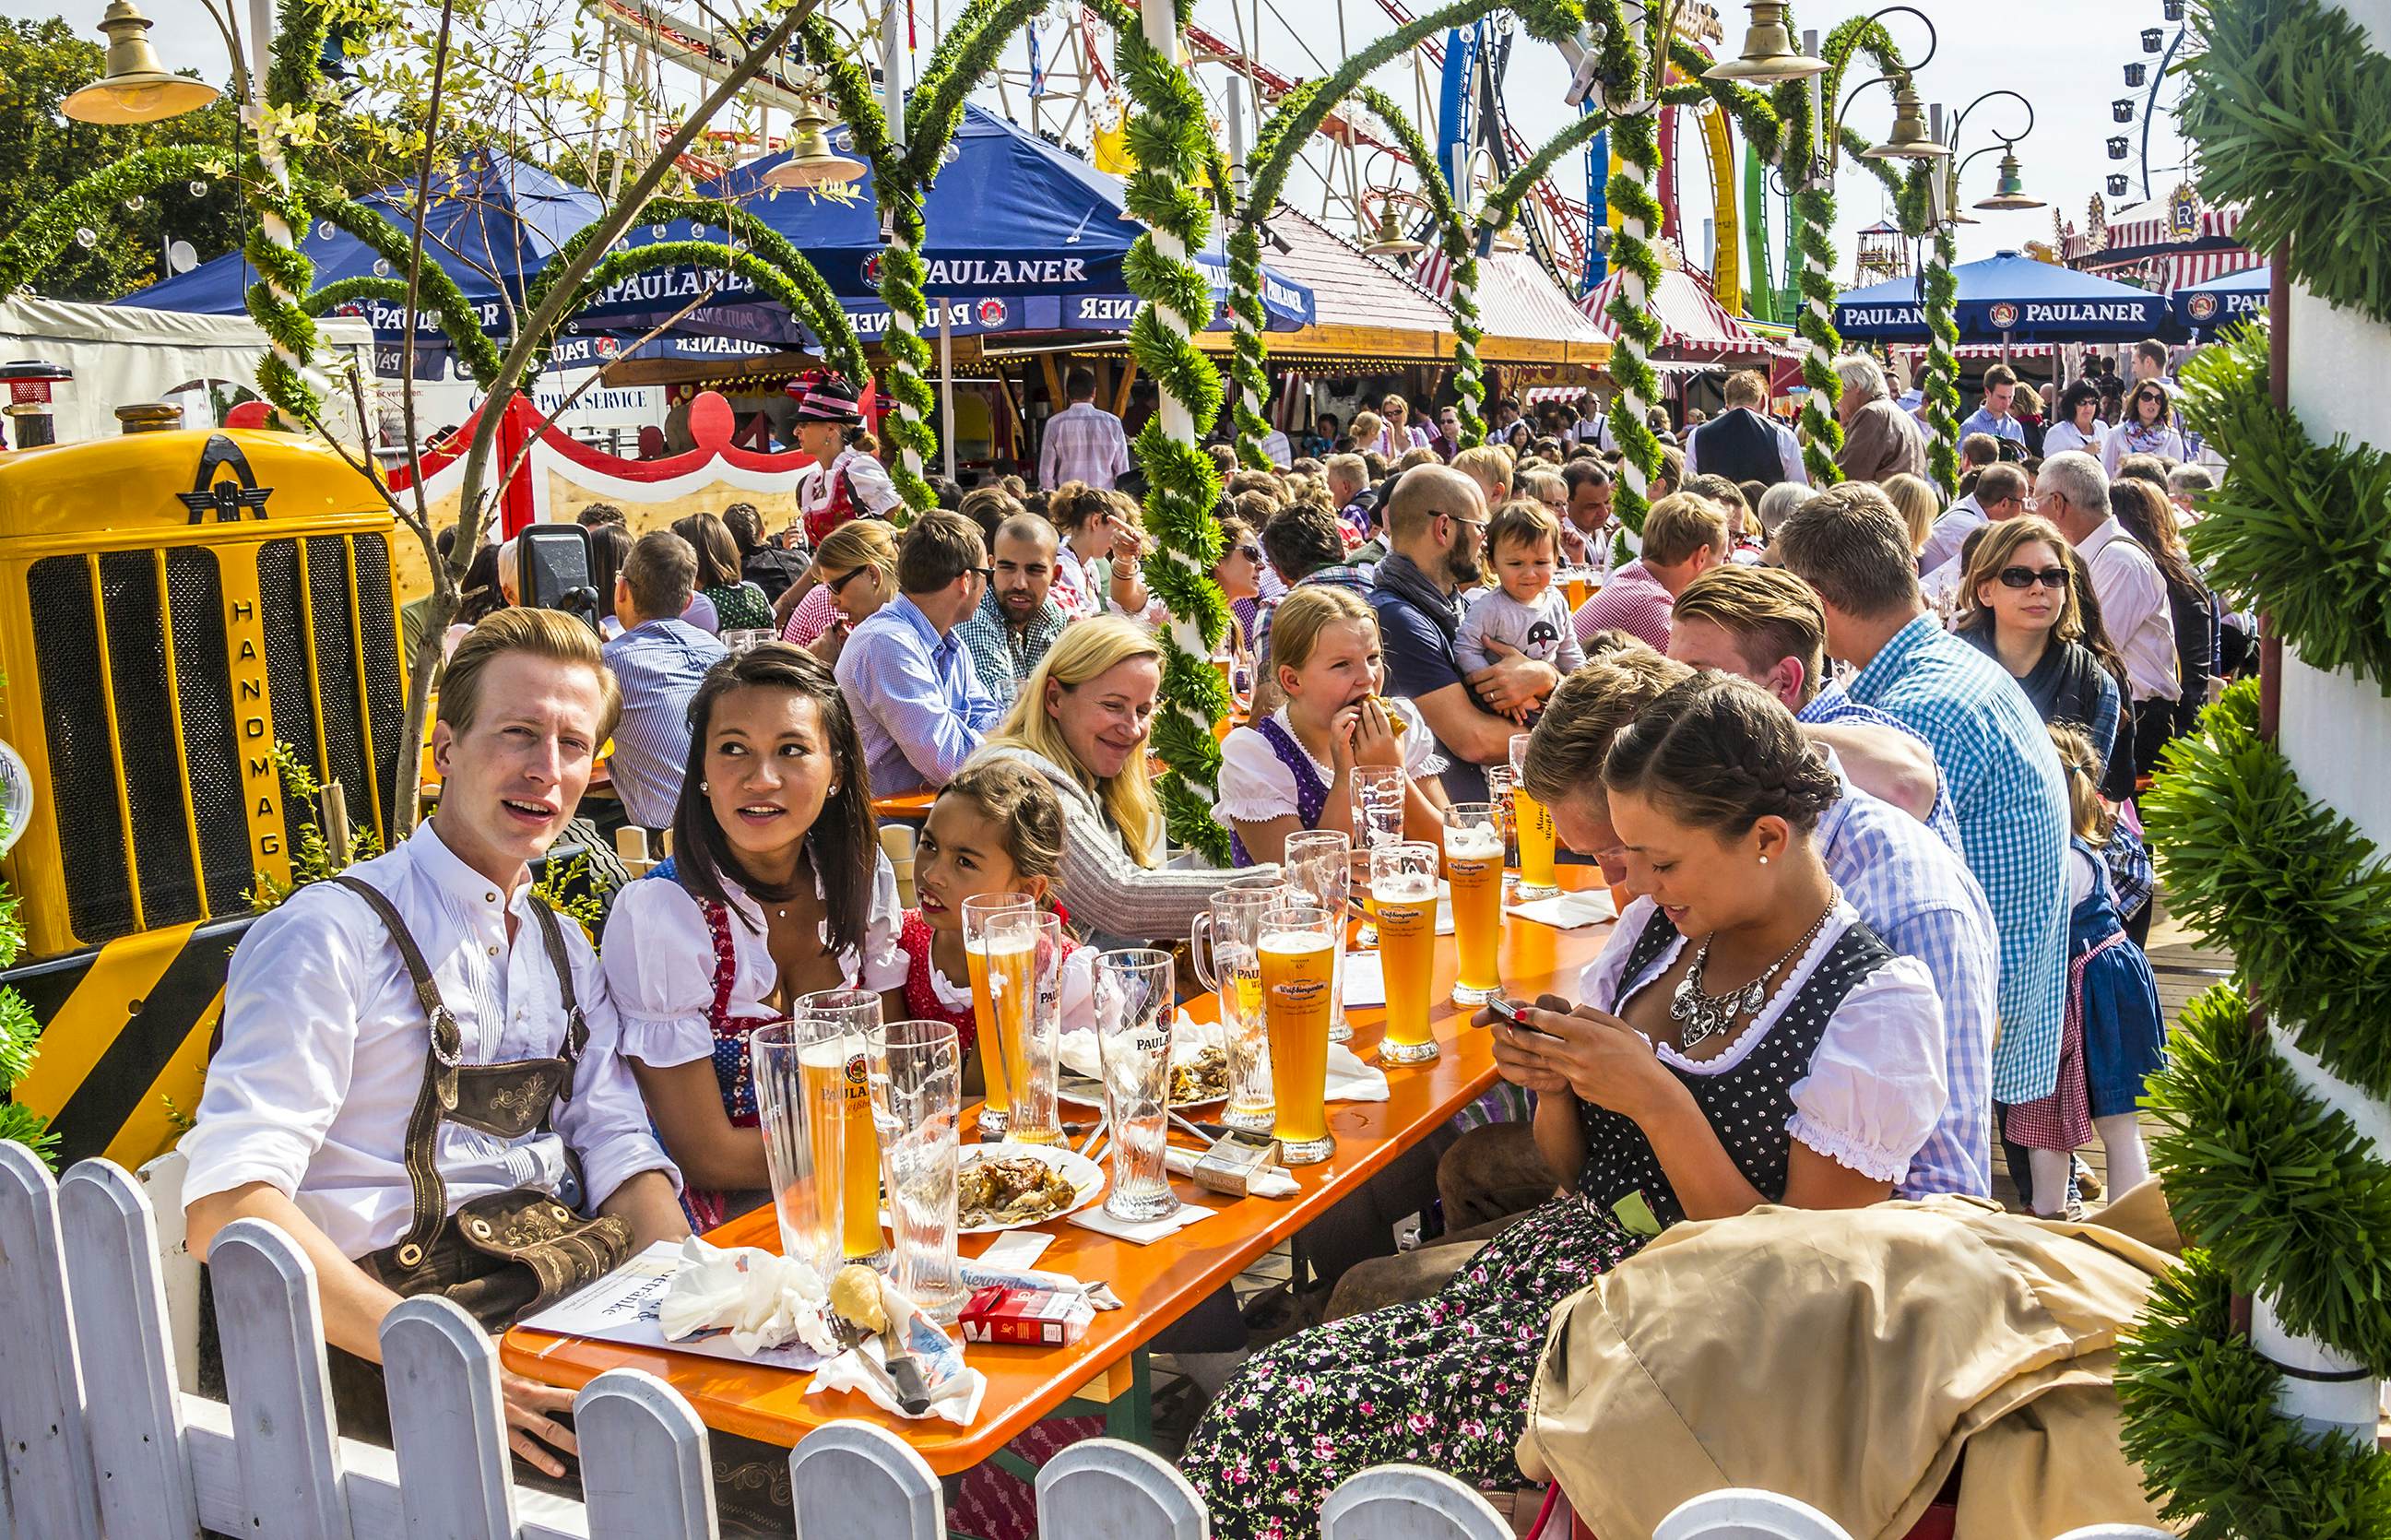 Oktoberfest is back for 2022 without any restrictions